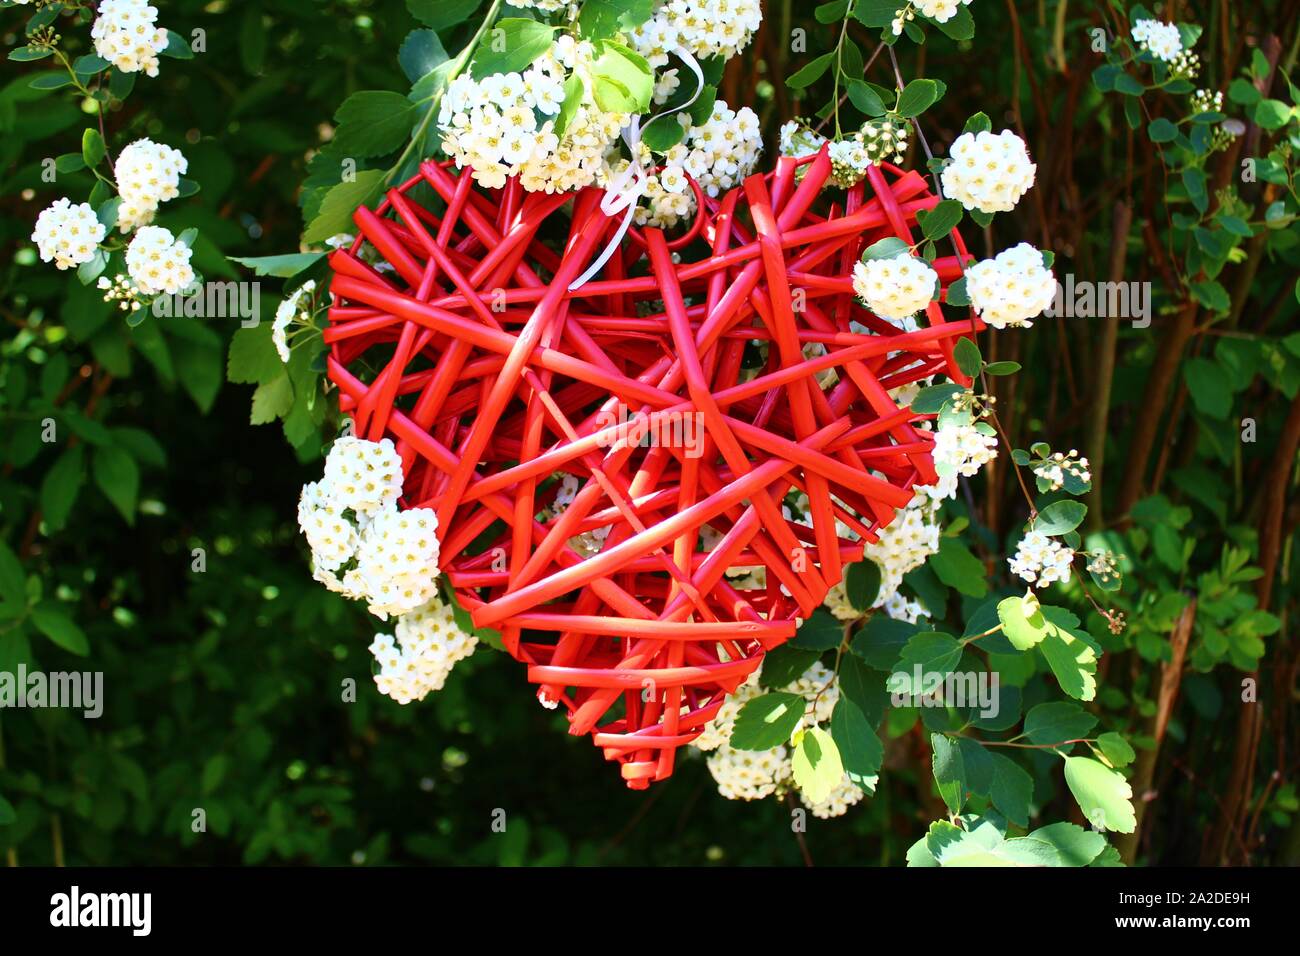 The picture shows a red heart in the snowberry bush. Stock Photo